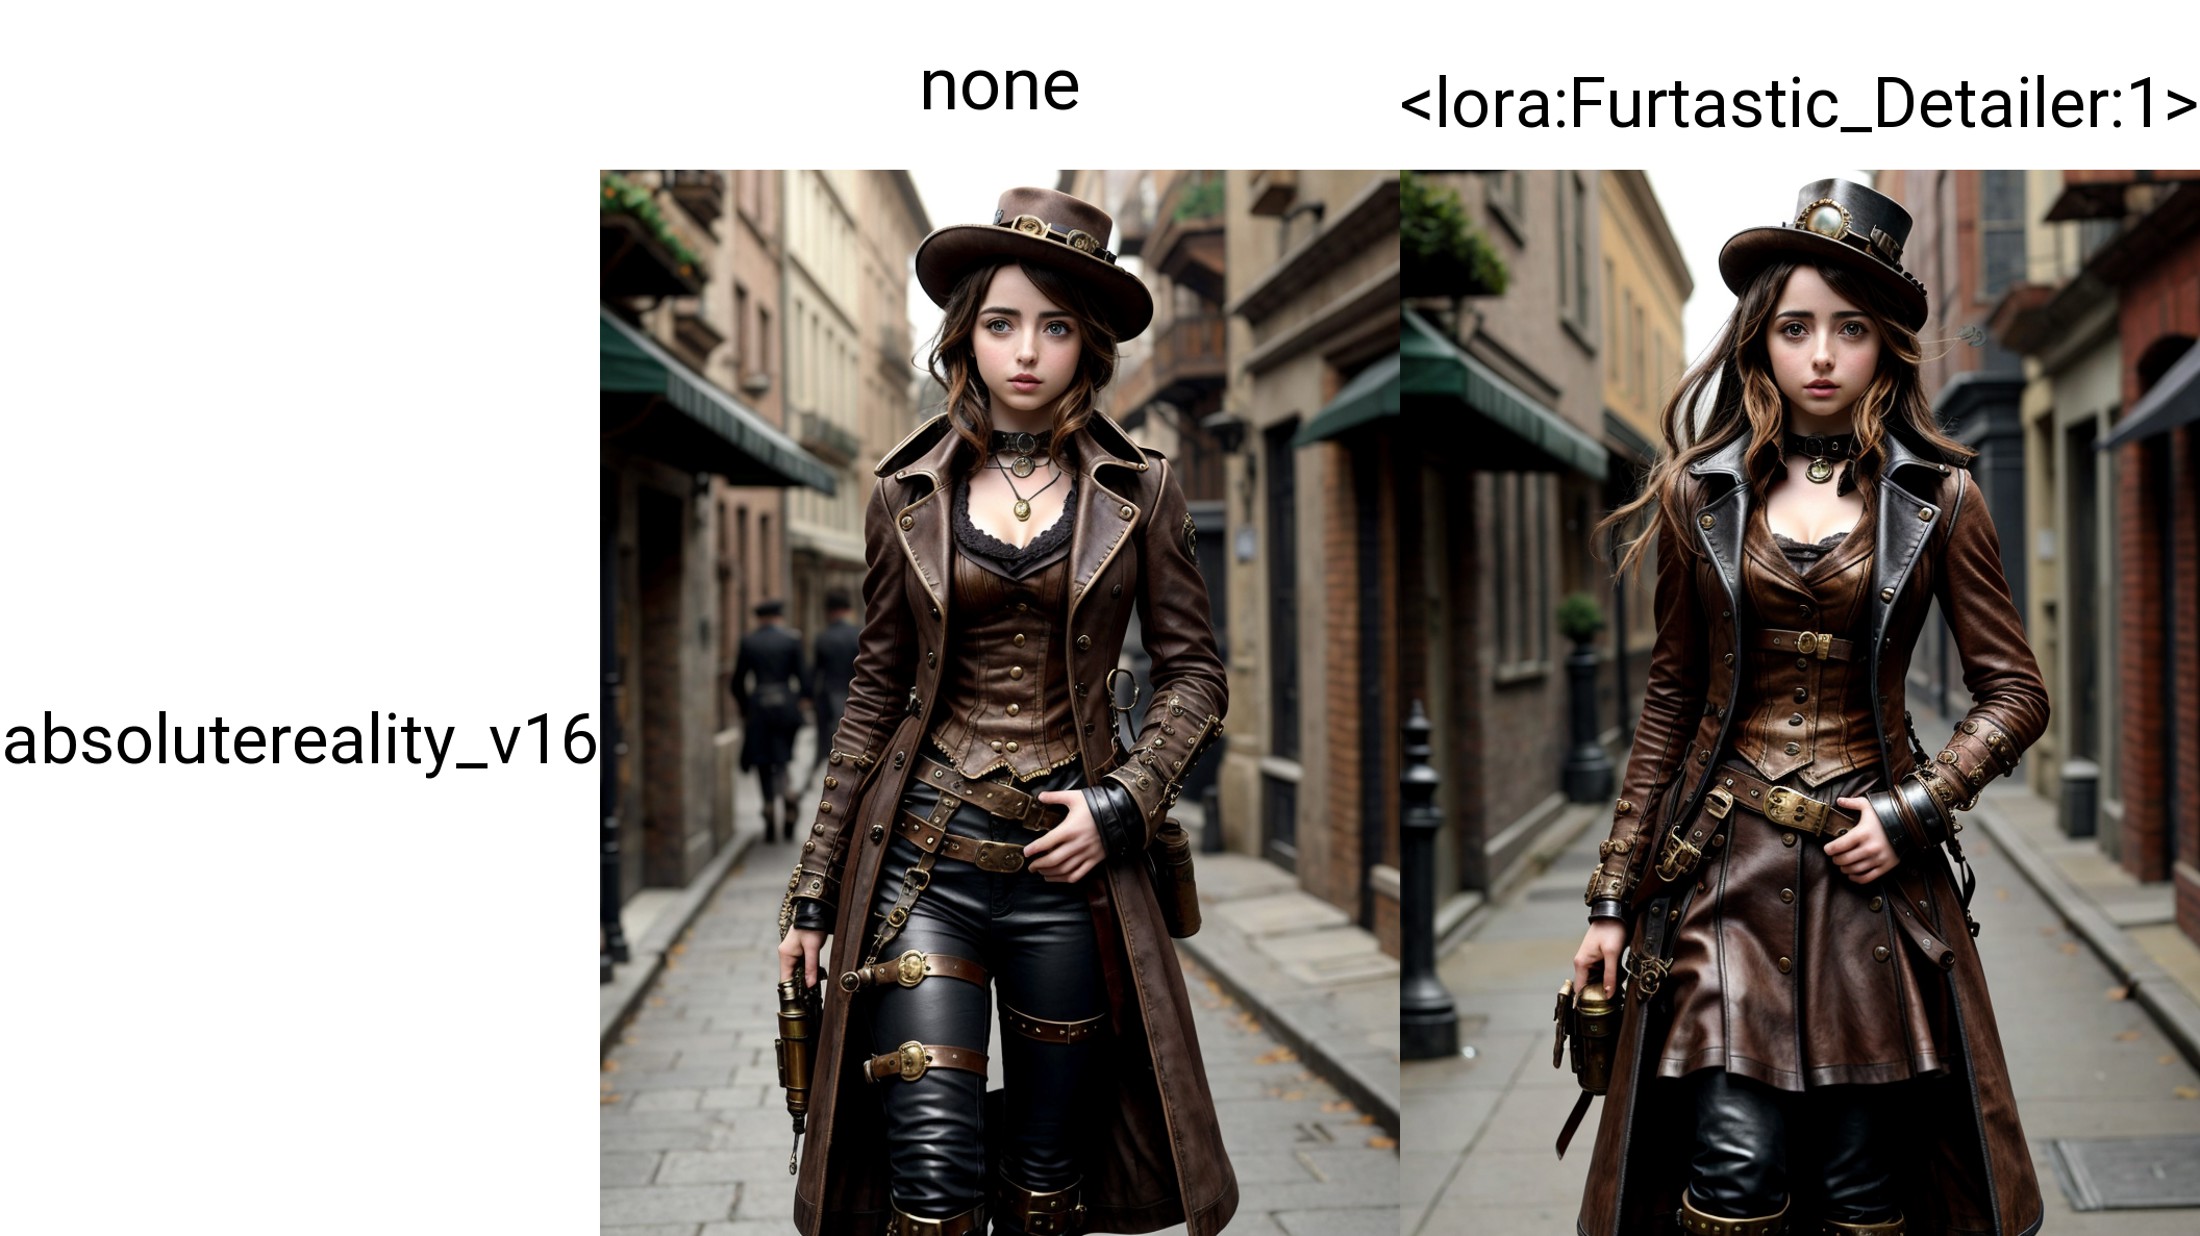 none , Cute steampunk ana de armas wearing a stylish steampunk outfit in a steampunk street, cinematic